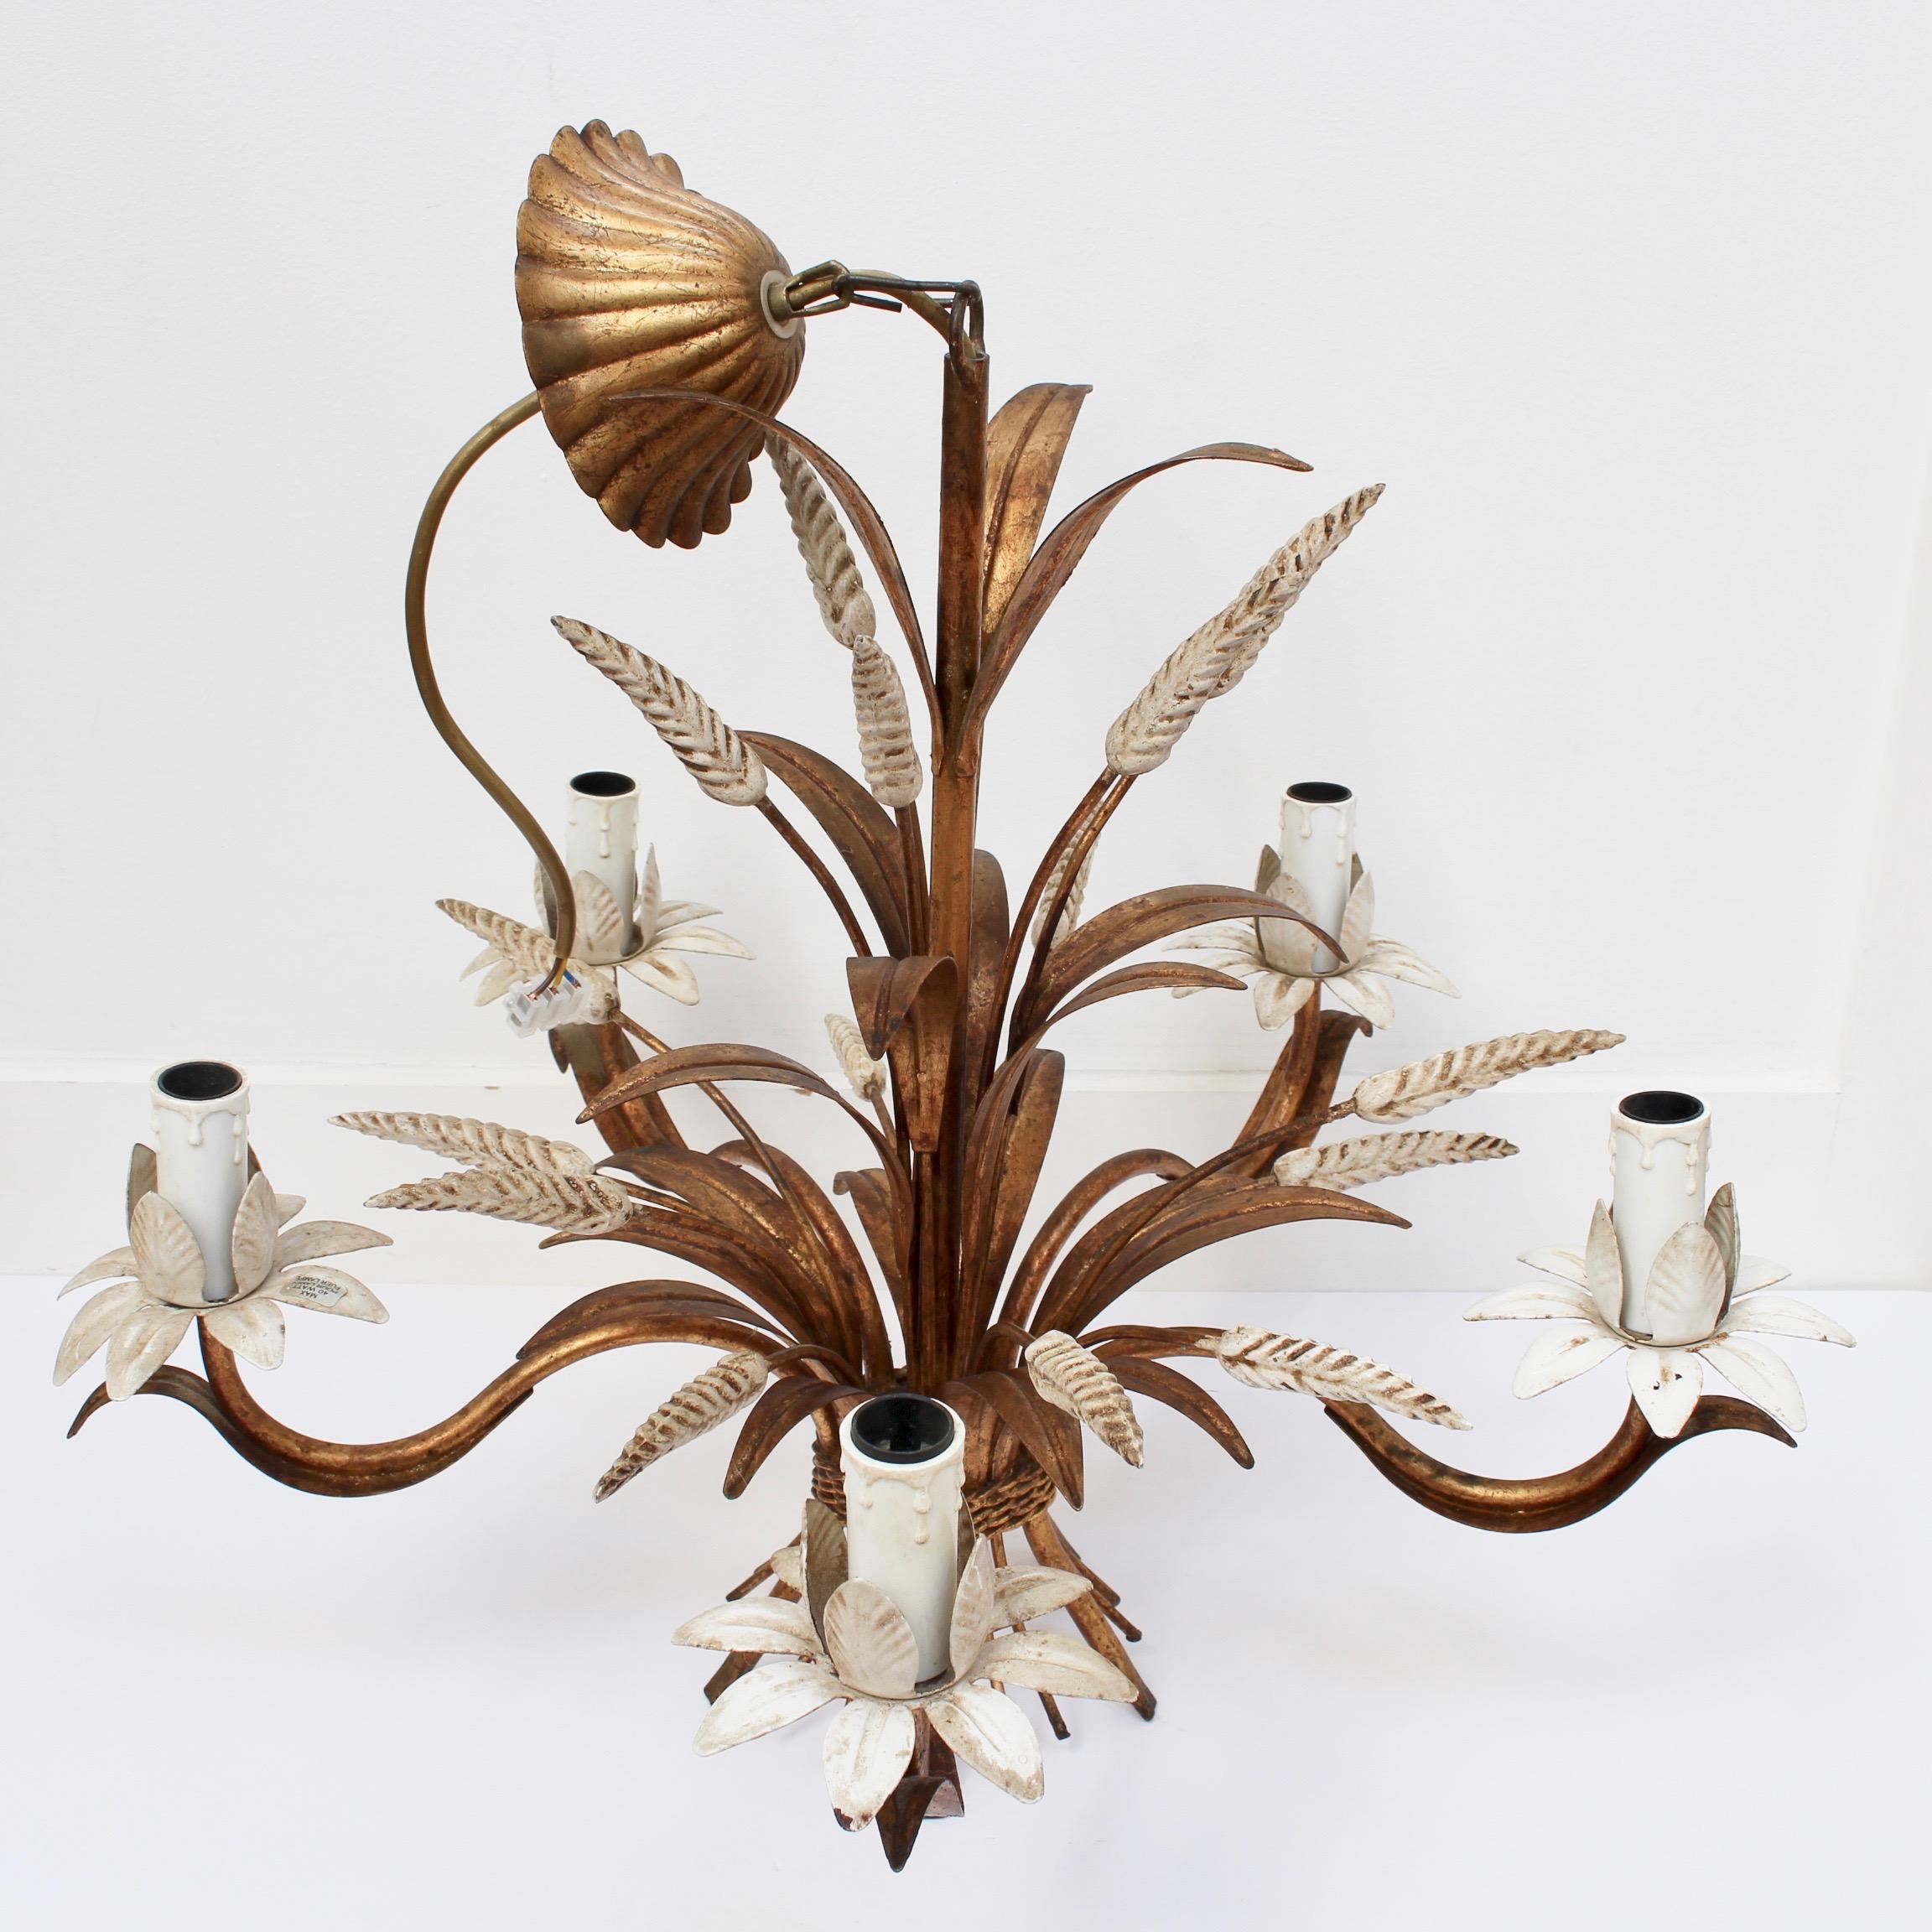 French decorative tole chandelier (circa 1960s). A classic wheat sheaf-shaped lighting fixture with five branches extending to ornamental bulb holders, each with a surround of leaves. Near the top of the piece, a flower-shaped cover connects the